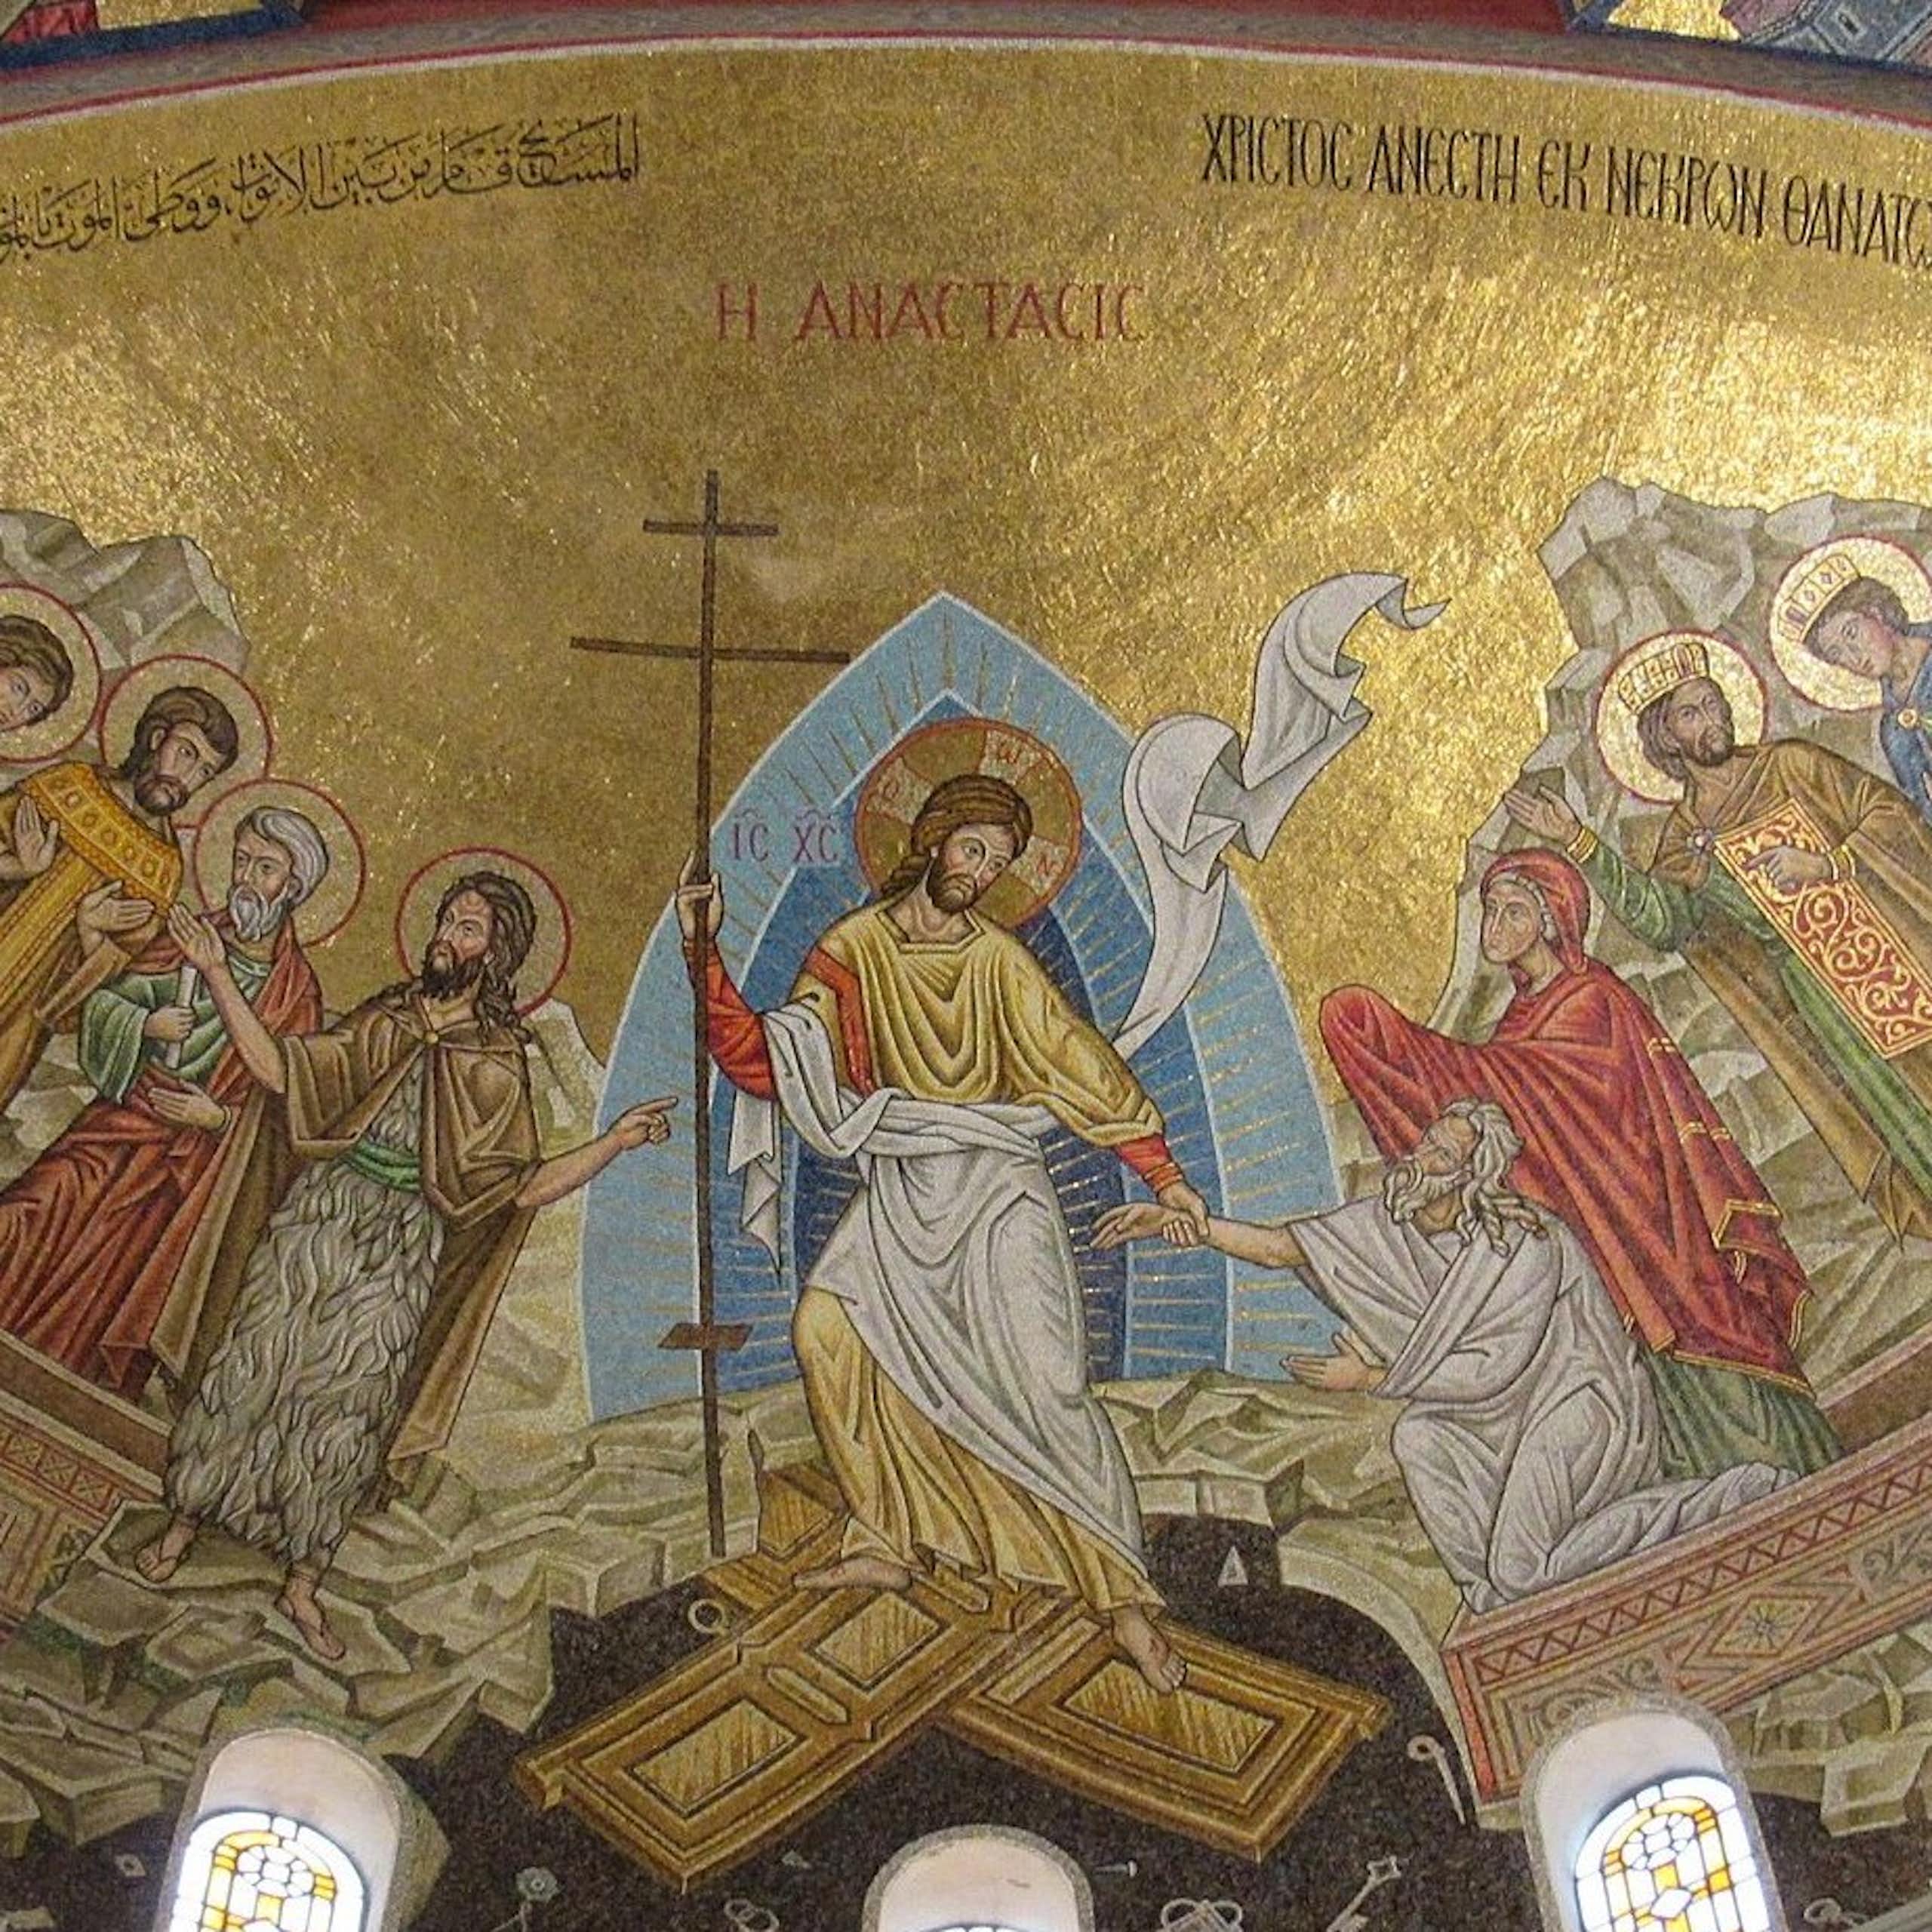 A mosaic with a golden background, six figures with halos, Jesus holding a cross in the middle, and two people whom he is helping out of coffins.